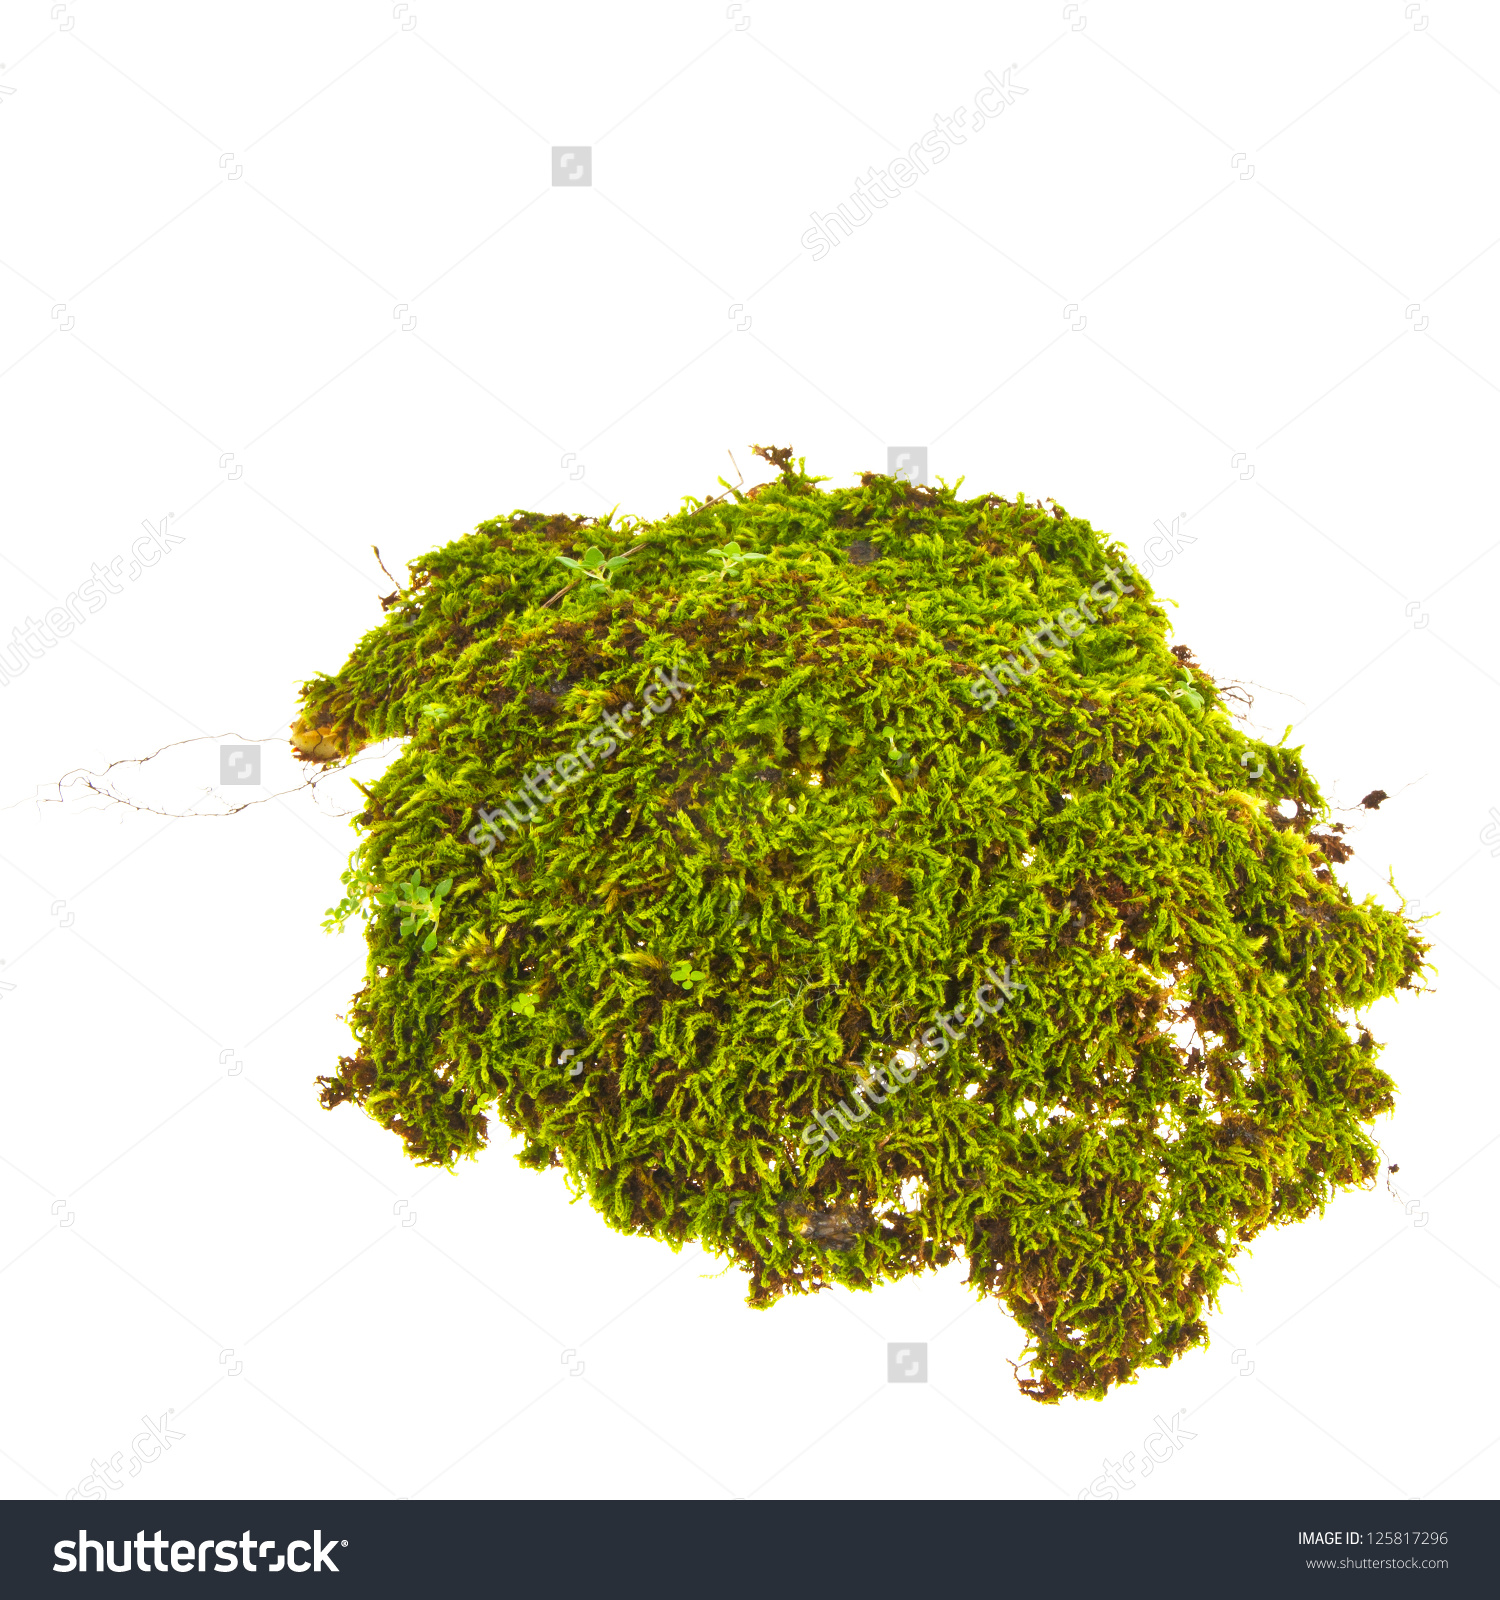 Moss clipart #9, Download drawings